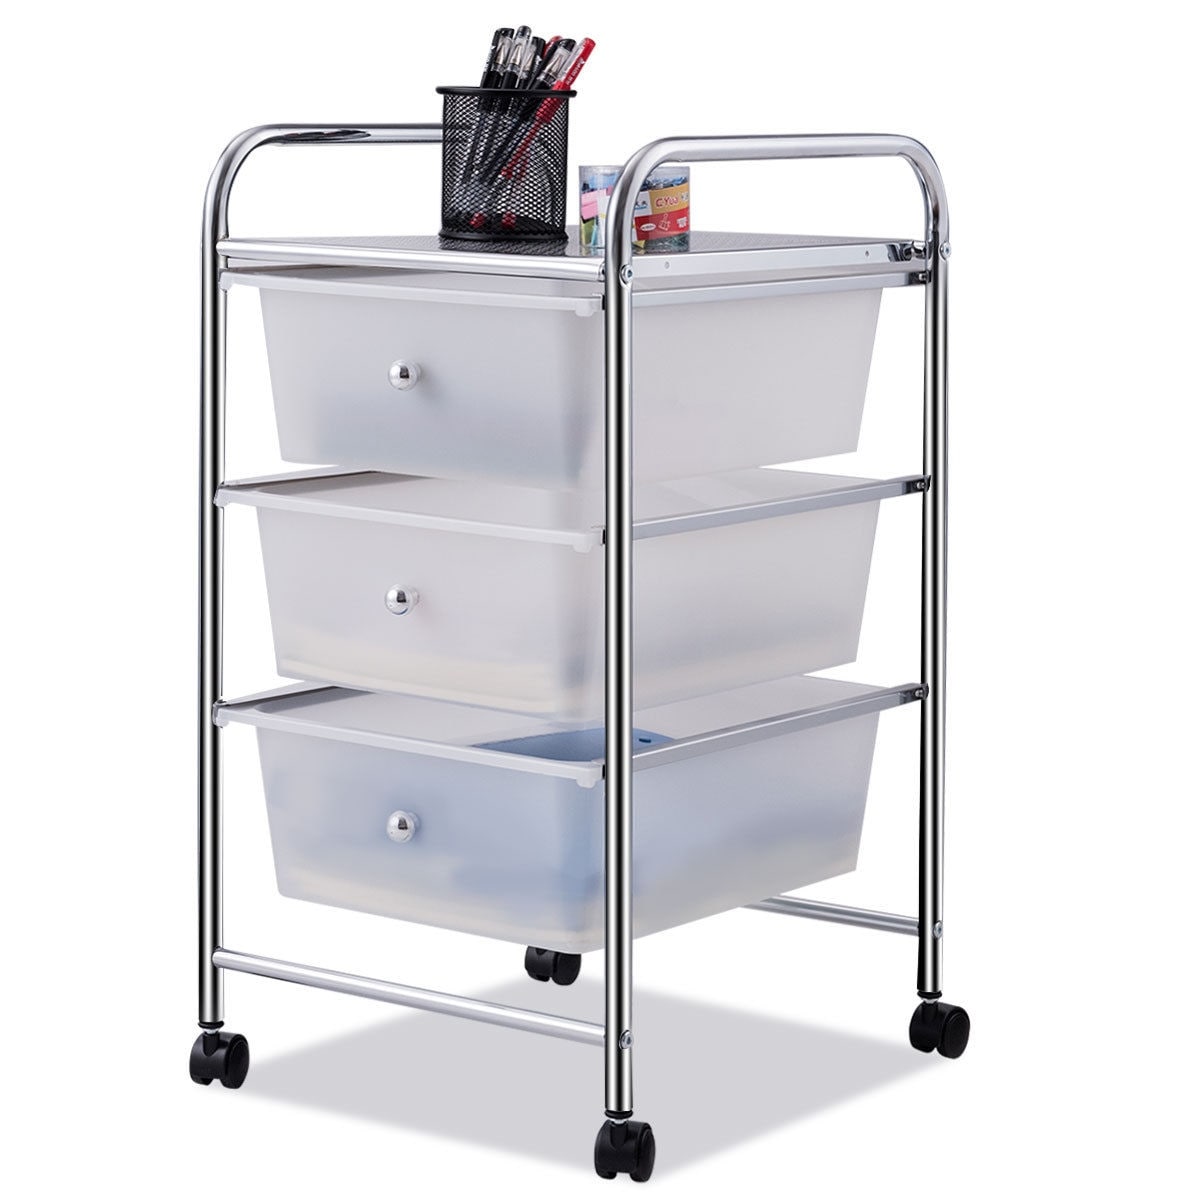 https://ak1.ostkcdn.com/images/products/is/images/direct/9b538252d60ed1674f1262d7d90efd1807333a61/Costway-3-Drawers-Metal-Rolling-Storage-Cart-Scrapbook-Supply-%26-Paper-Home-Office-White.jpg